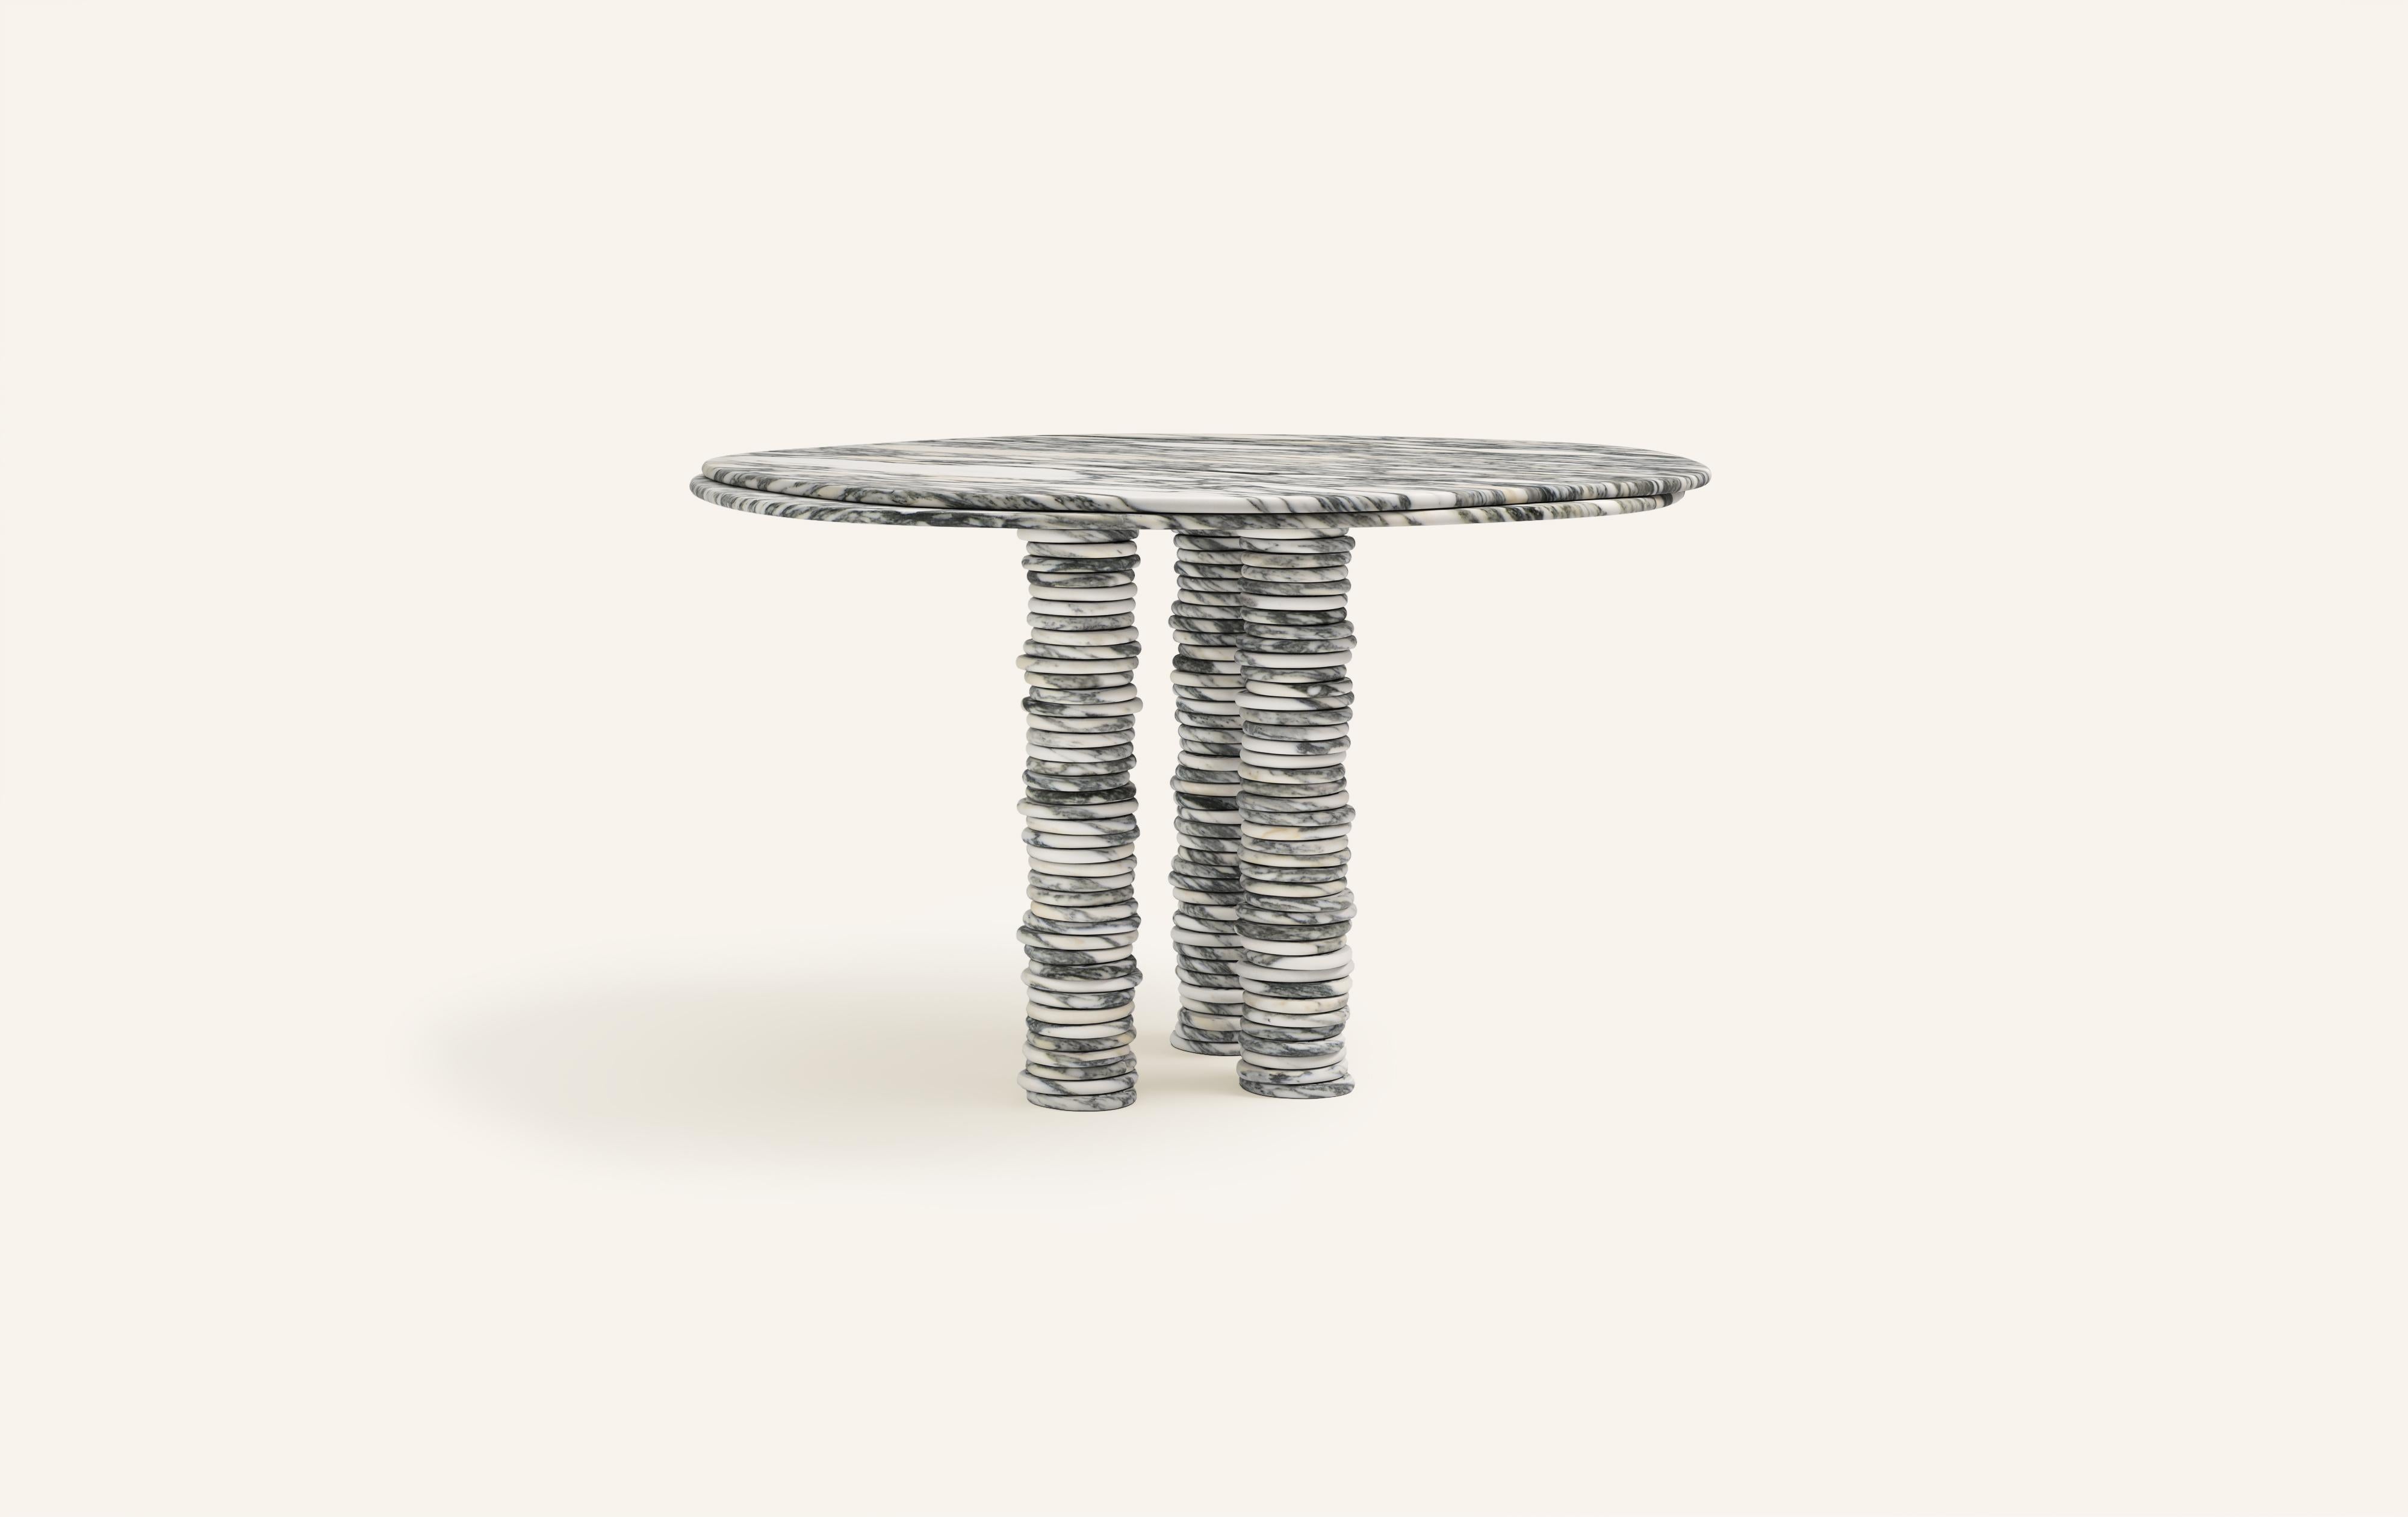 'ONDA', ITALIAN FOR 'WAVE', HAS INSPIRED A FREEFORM ORGANIC BODY, HEROING A COMPLEX AND TEXTURED COLLECTION. COMPRISING SIDE TABLES FOR LAYERING, COFFEE TABLES AND DINING TABLES.

DIMENSIONS:
48”L x 48”W x 29-3/4”H: 
- 1.5